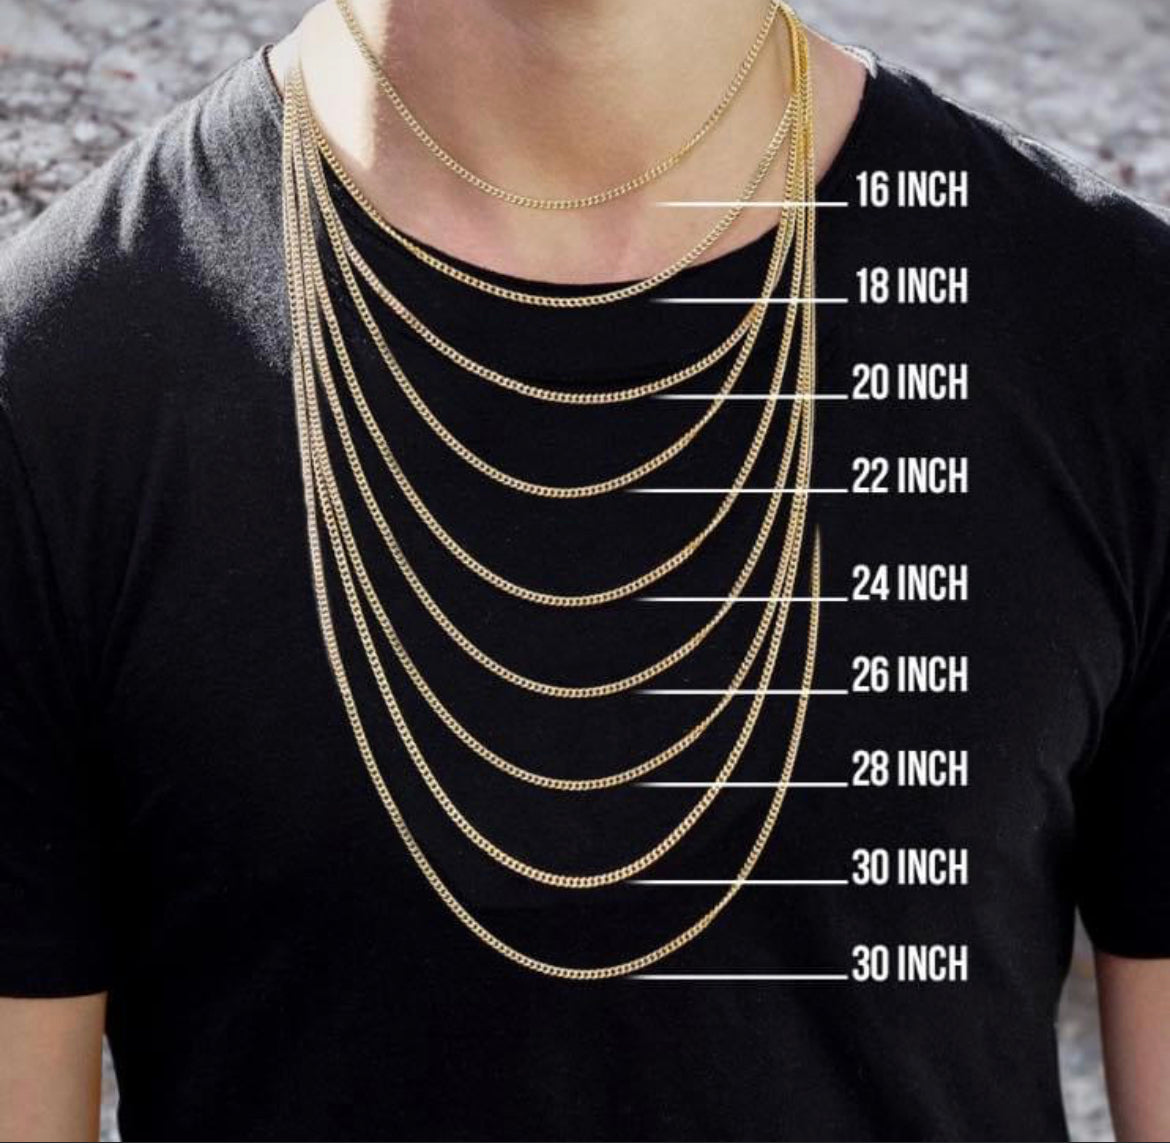 10K Gold- Solid Miami Cuban Chain (Yellow Gold)